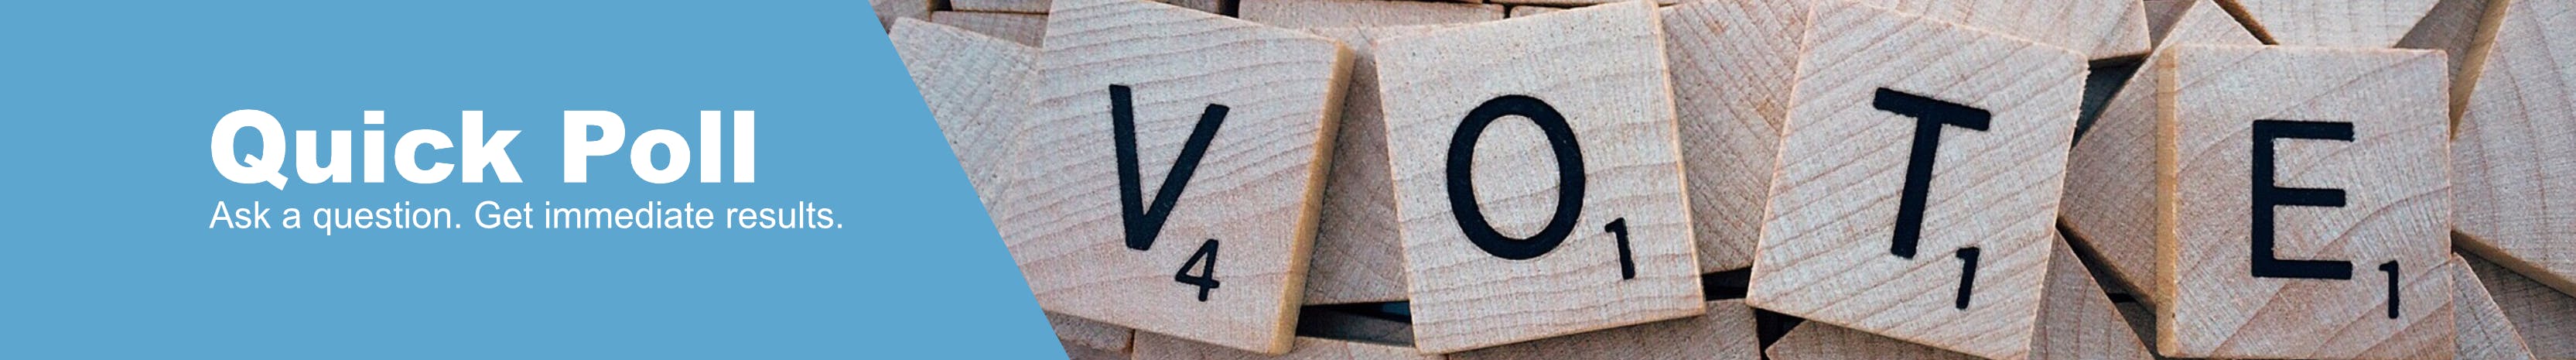 Quick poll: Ask a question. Get immediate results. Photo image of scrabble tiles spelling VOTE